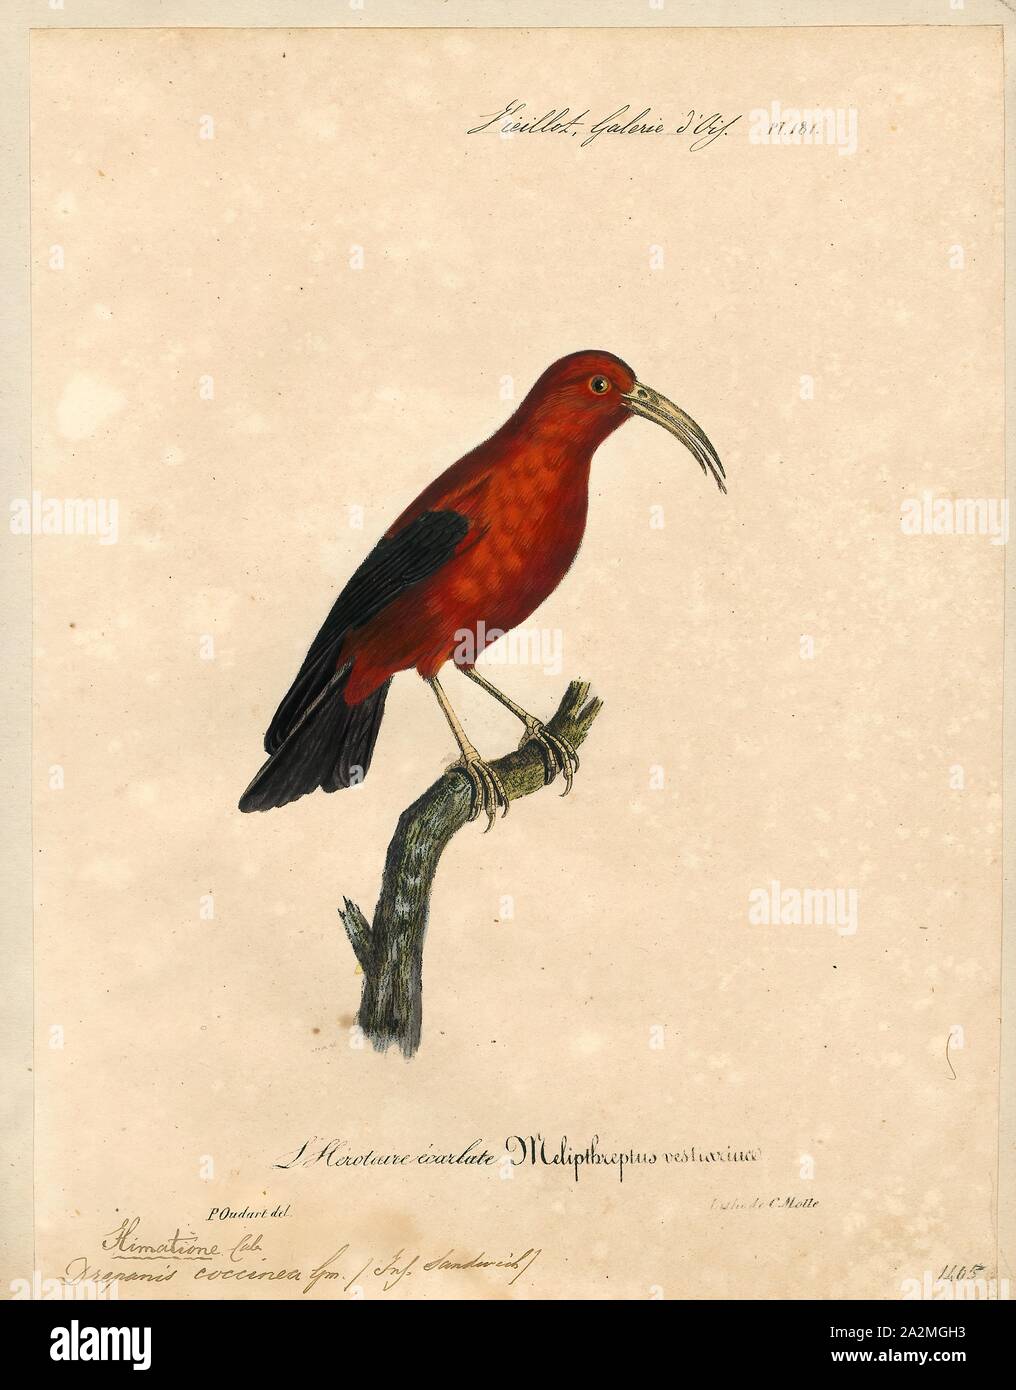 Drepanis coccinea, Print, The 'I'iwi, or scarlet honeycreeper is a species of Hawaiian honeycreeper. The 'I'iwi is a highly recognizable symbol of Hawaii. The 'I'iwi is the third most common native land bird in the Hawaiian Islands. Large colonies of 'I'iwi inhabit the islands of Hawaii, Maui, and Kaua'i, with smaller populations on Moloka'i but are no longer present on Lāna'i and O'ahu. ʻIʻiwi populations on Kauaʻi are decreasing while there are stable populations on Maui and Hawaii., 1825-1834 Stock Photo